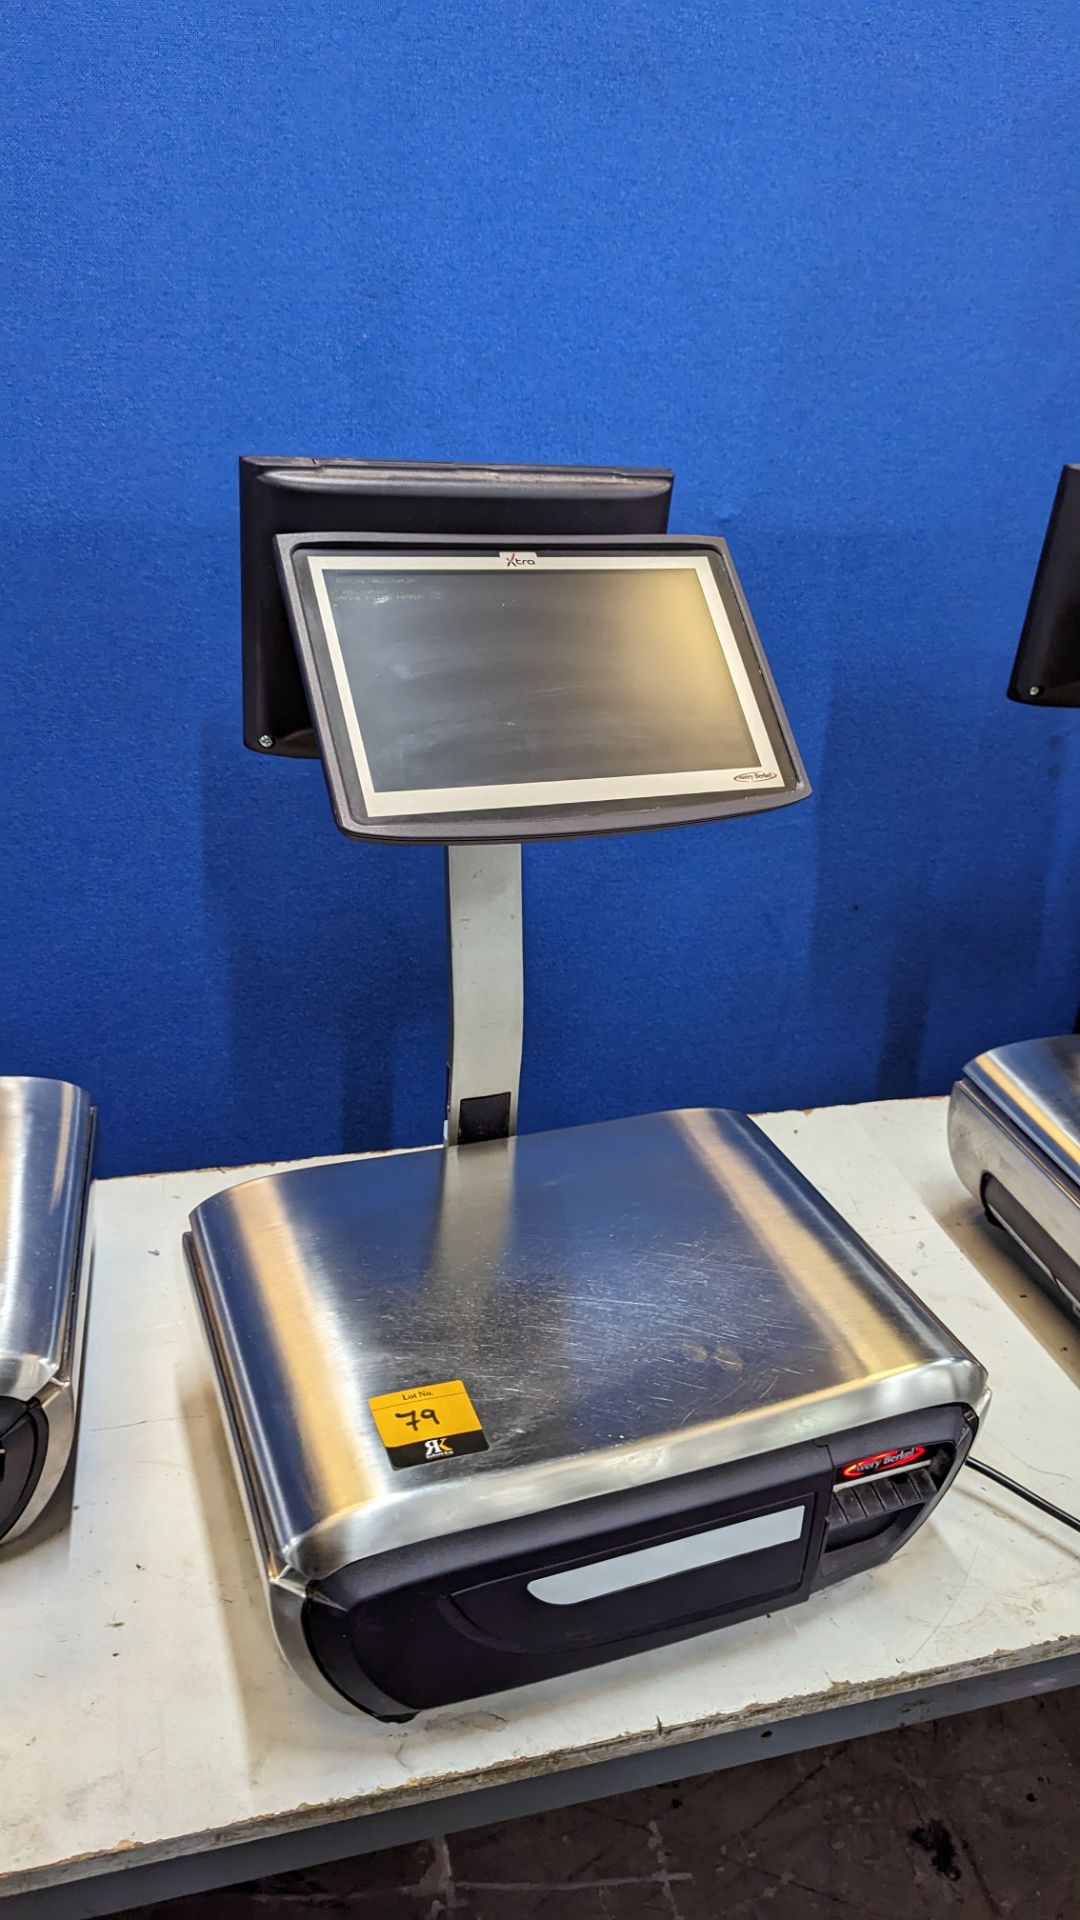 Avery Berkel Xti 400 Label & Receipt printing scale. 6kg/15kg capacity. These scales include a 10" - Image 3 of 17